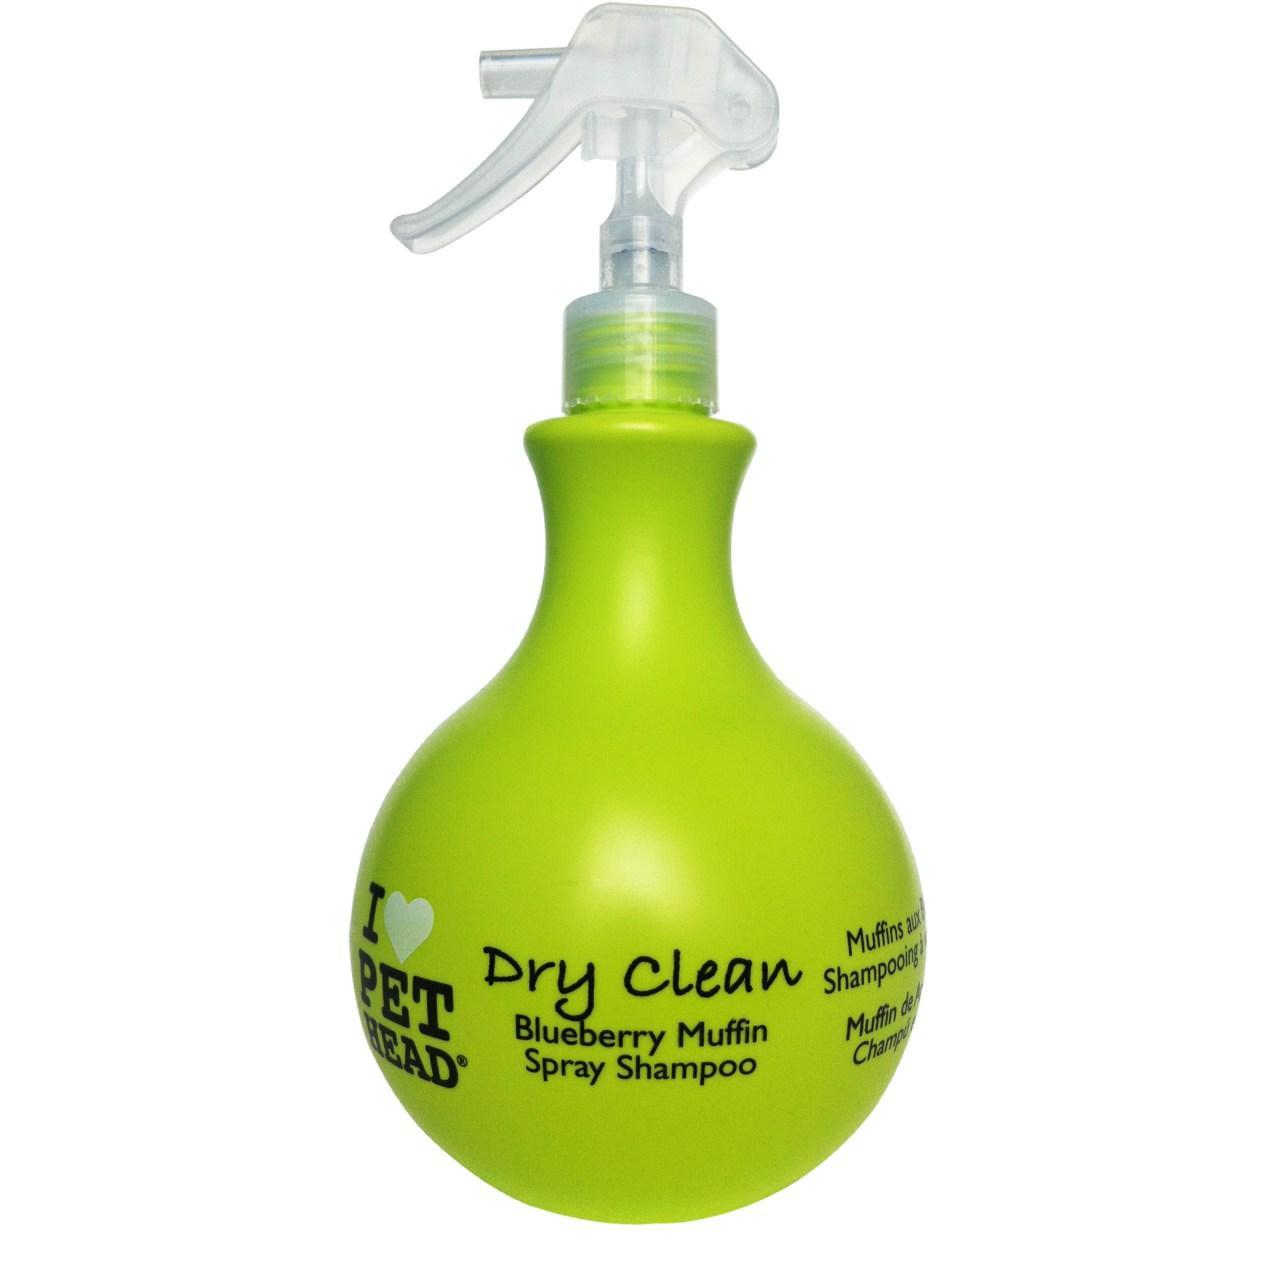 An image of Pet Head Dry Clean